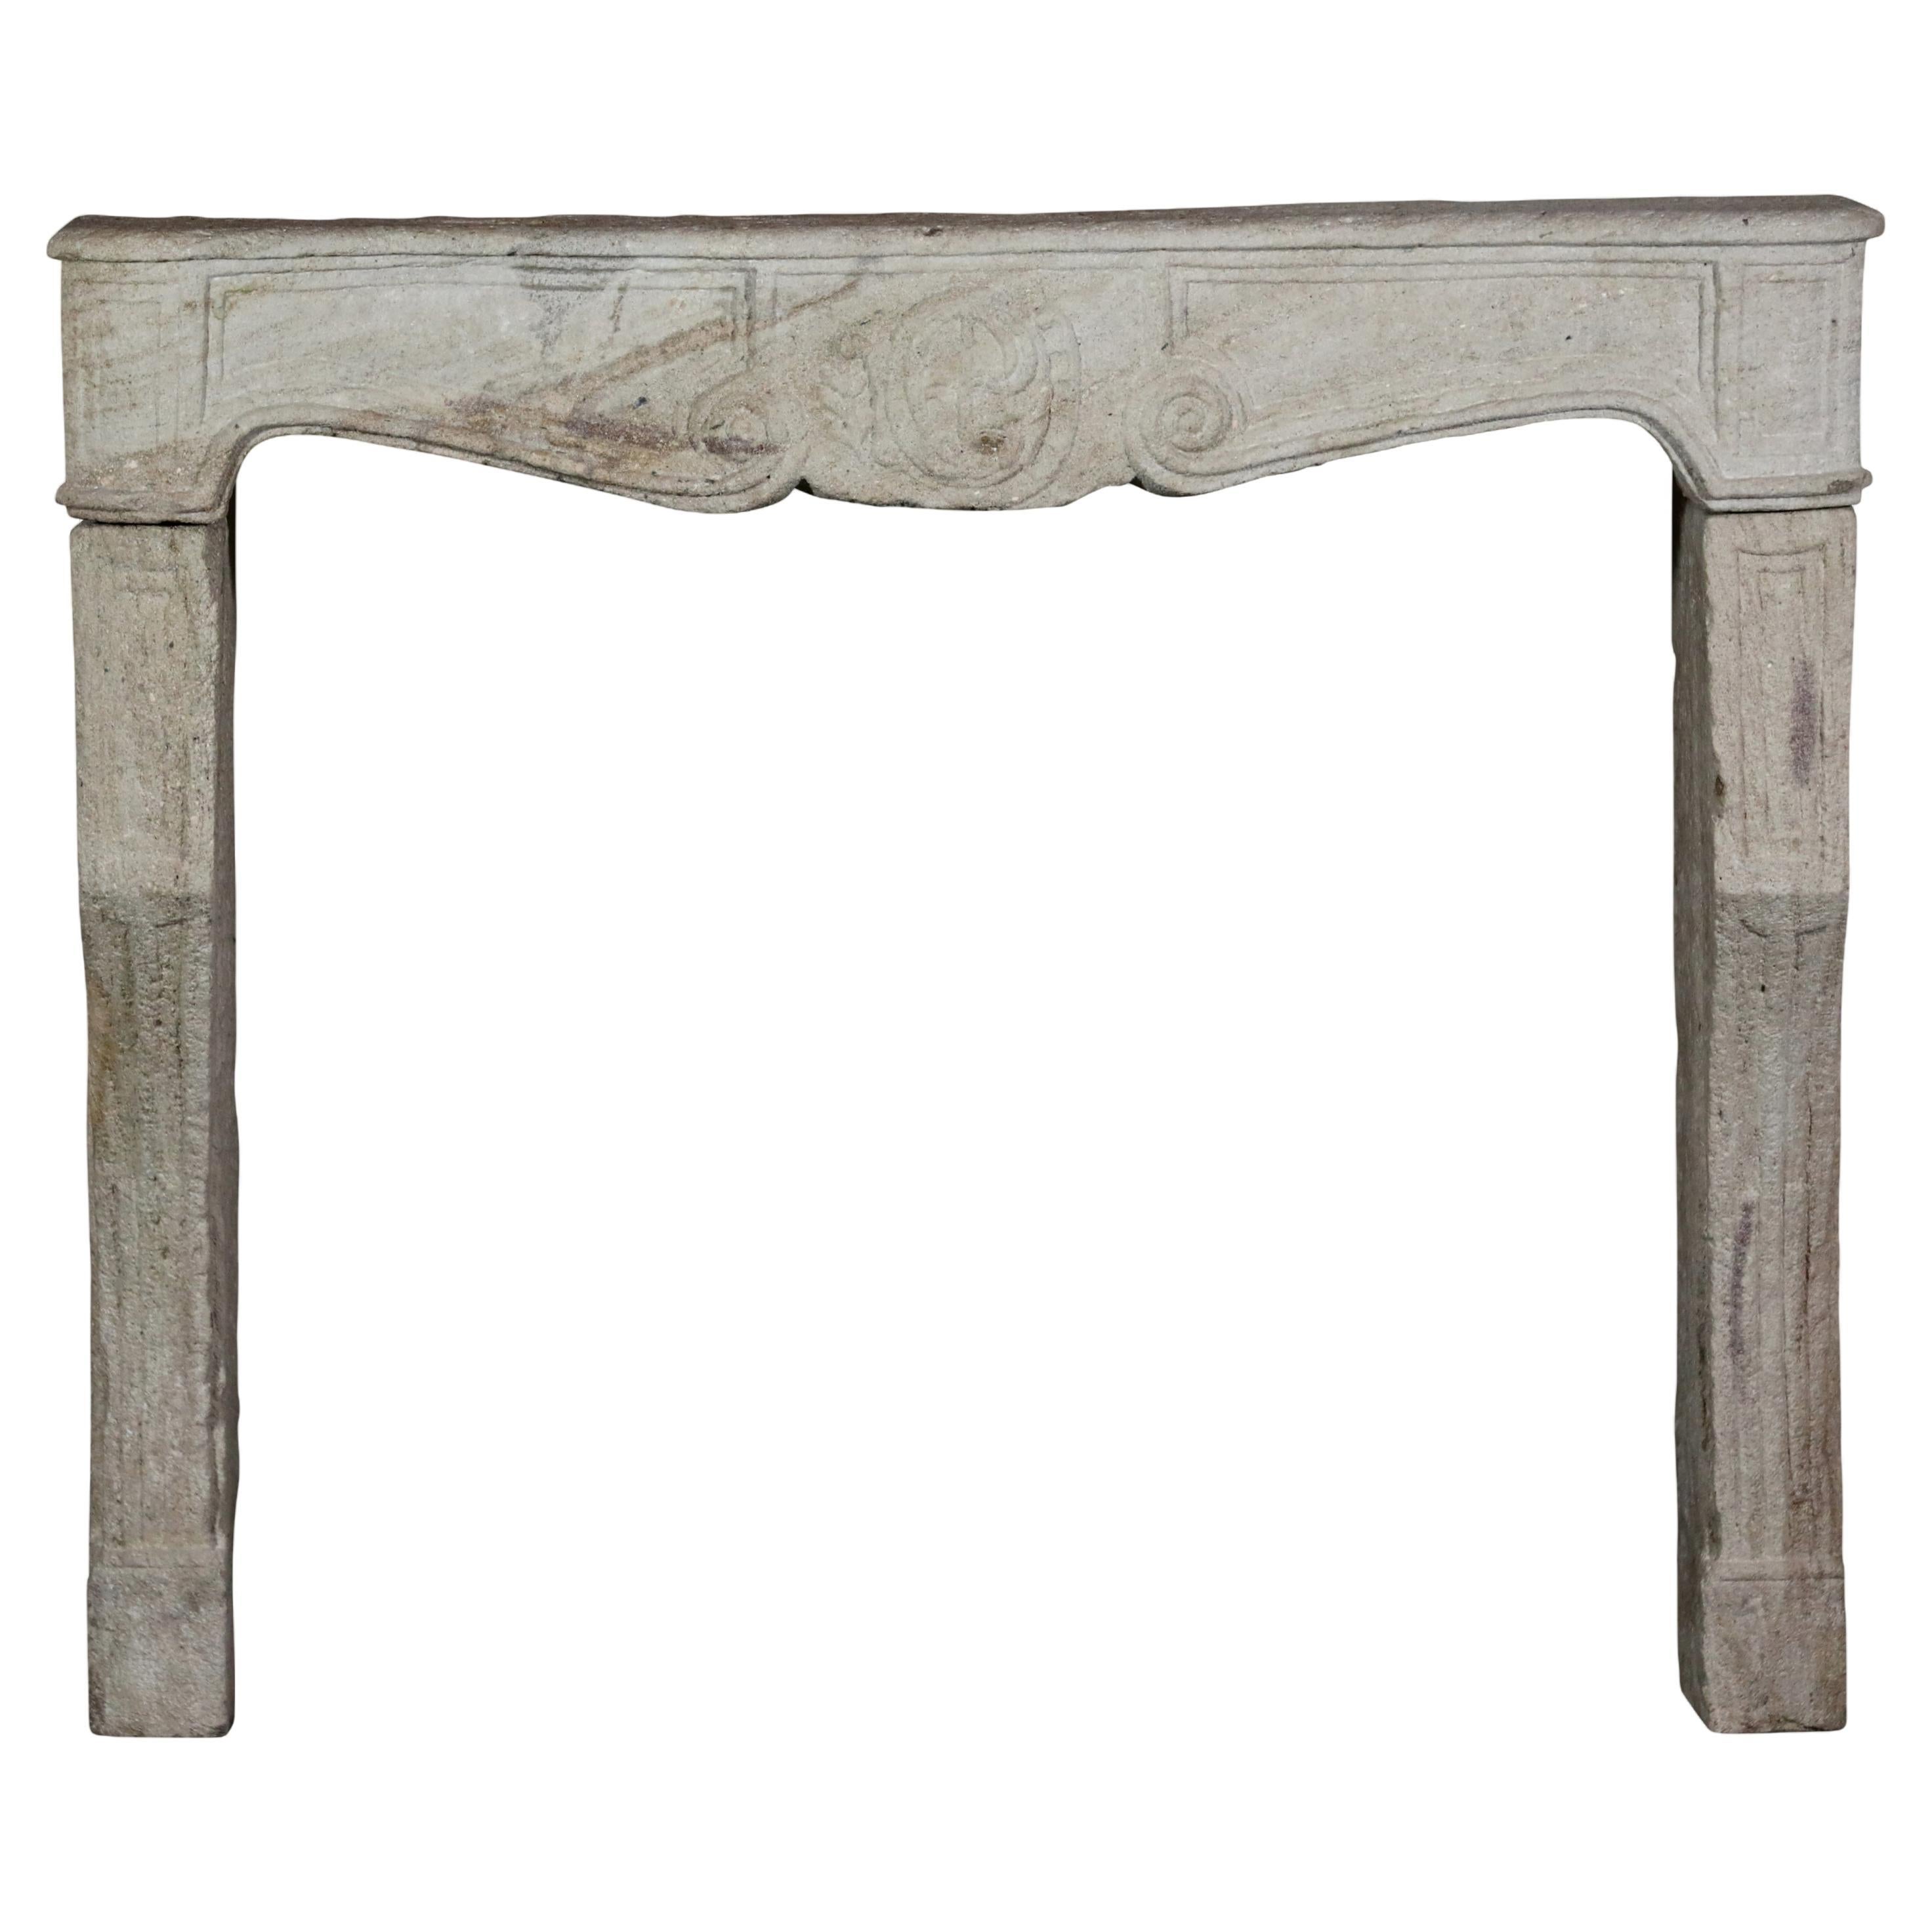 Rustic Stone Fireplace Surround From France For Authentic Interior Creation For Sale